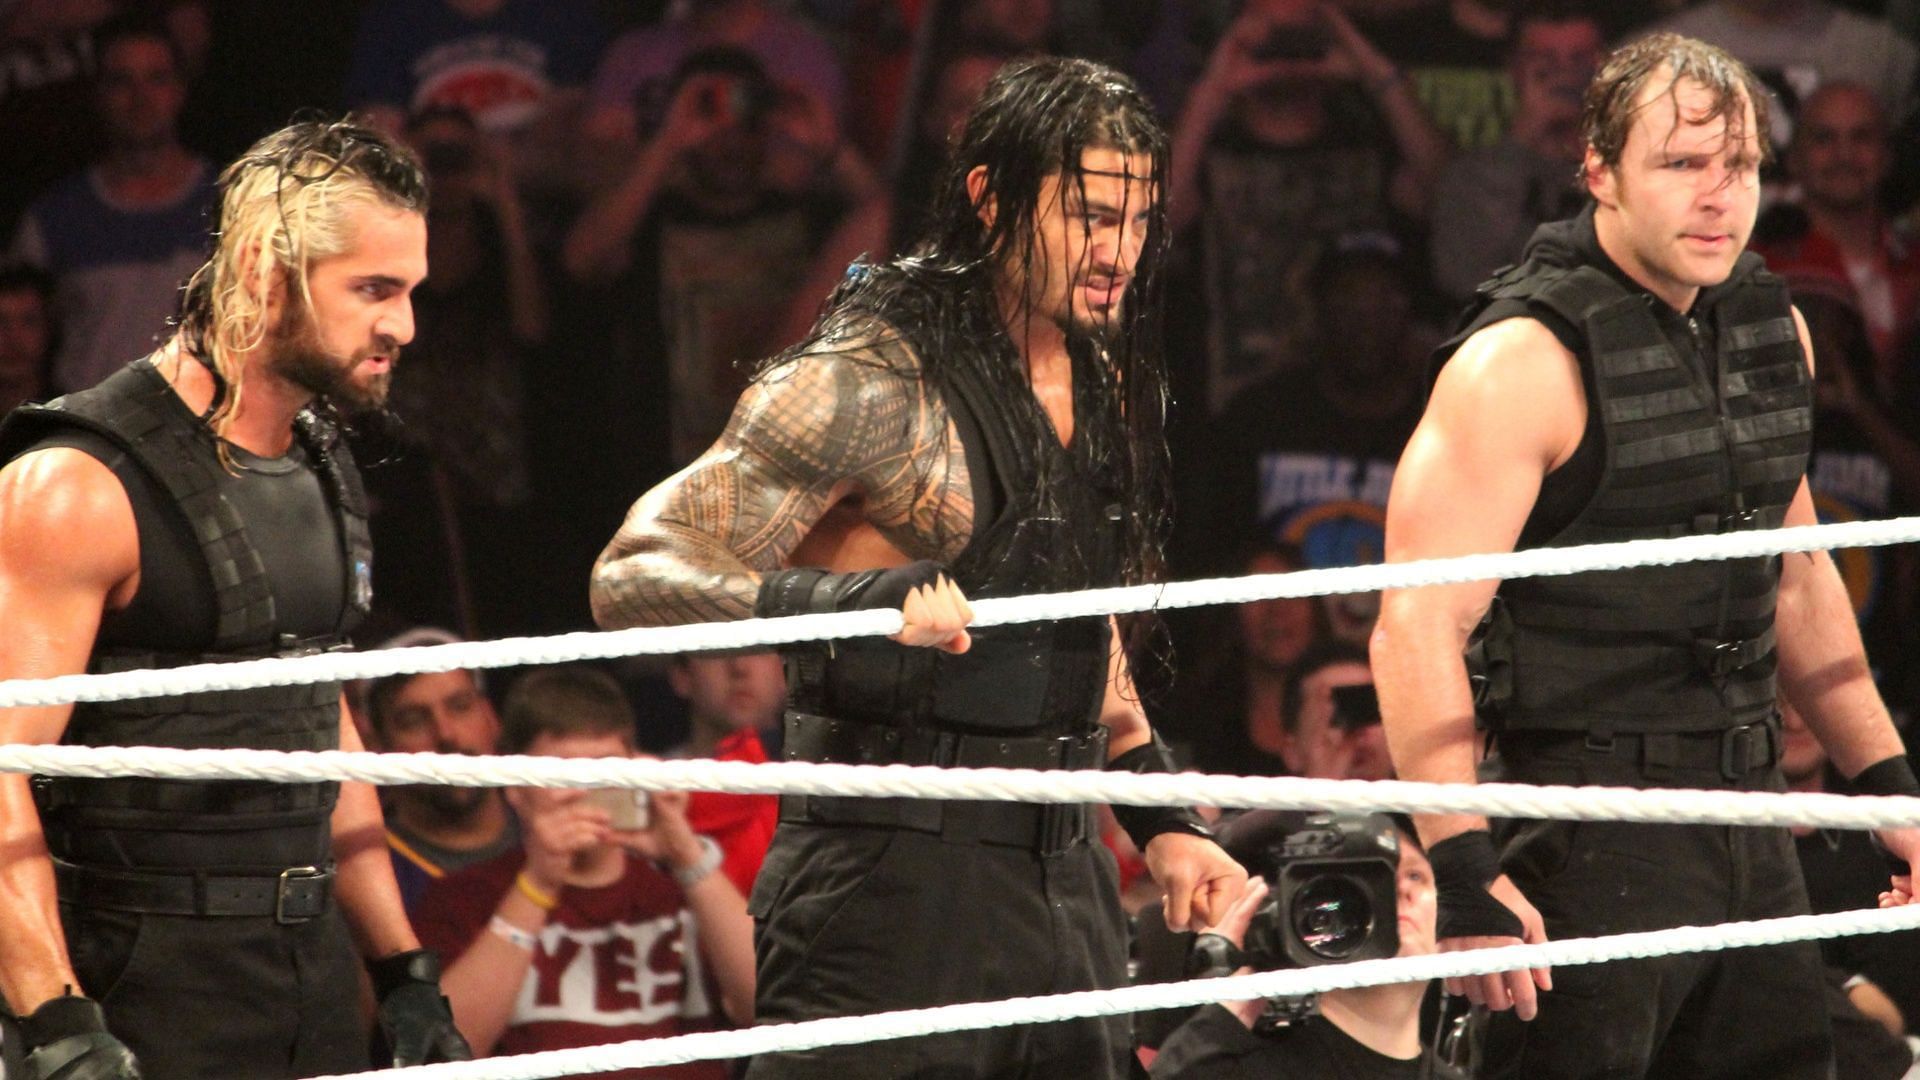 The Shield debuted on the WWE main roster in 2012.